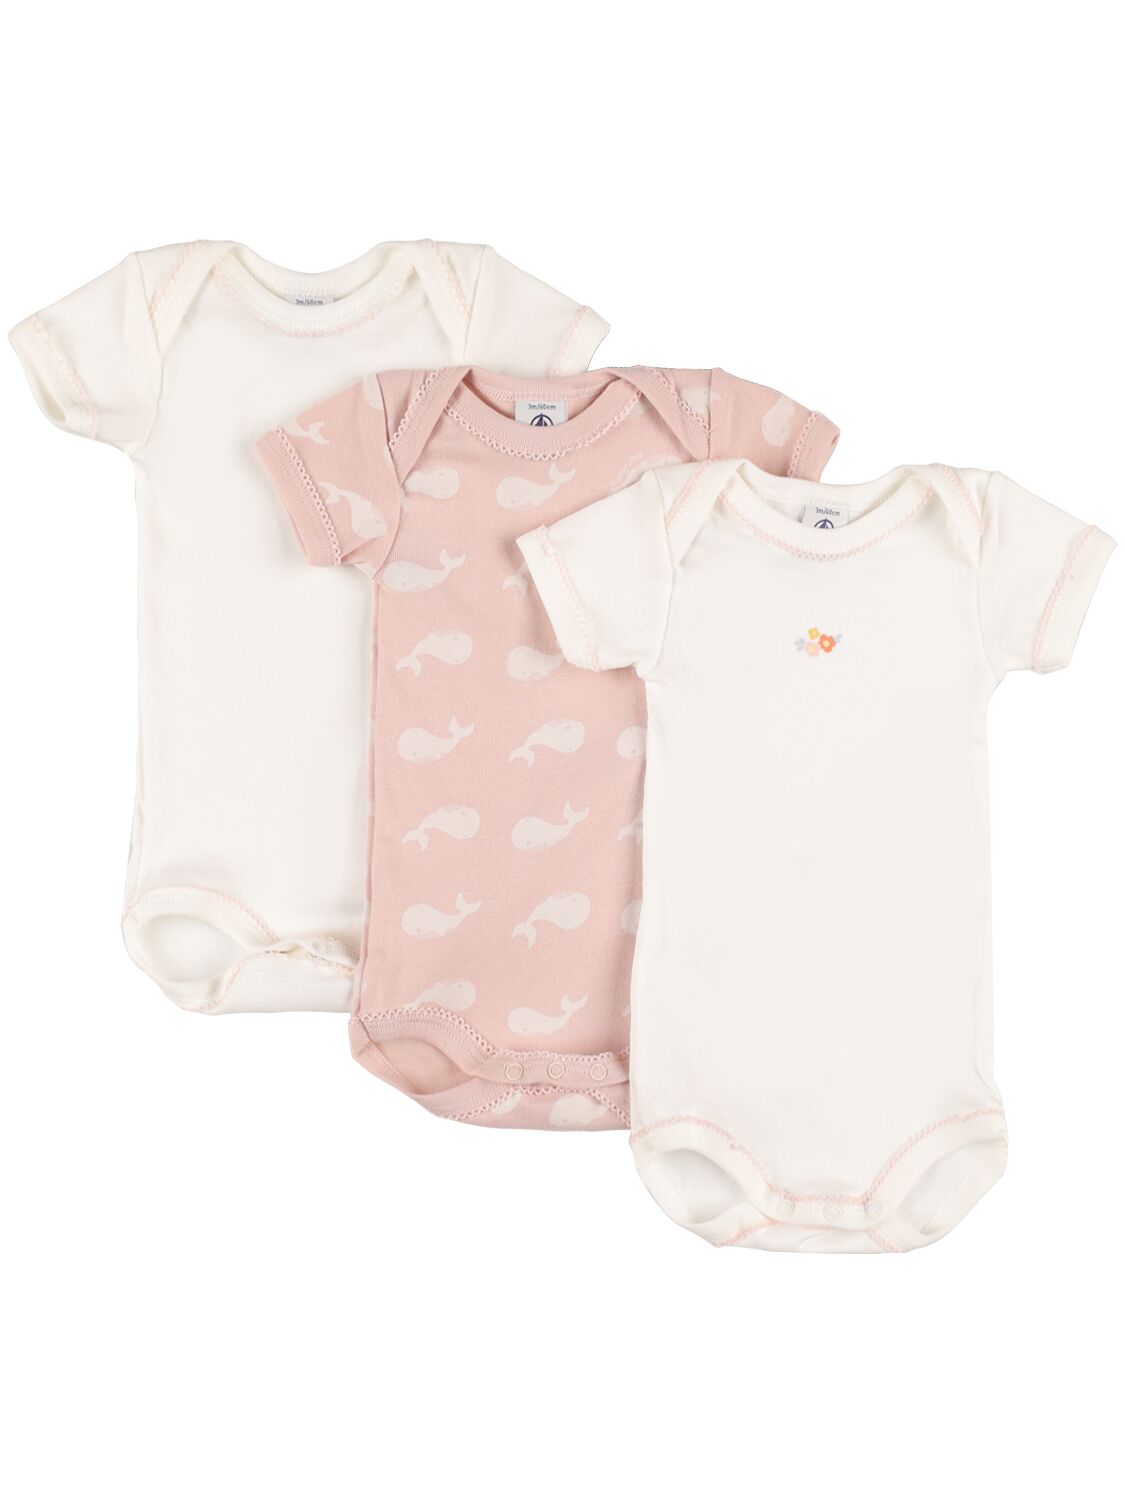 Image of Set Of 3 Whale Cotton Bodysuits